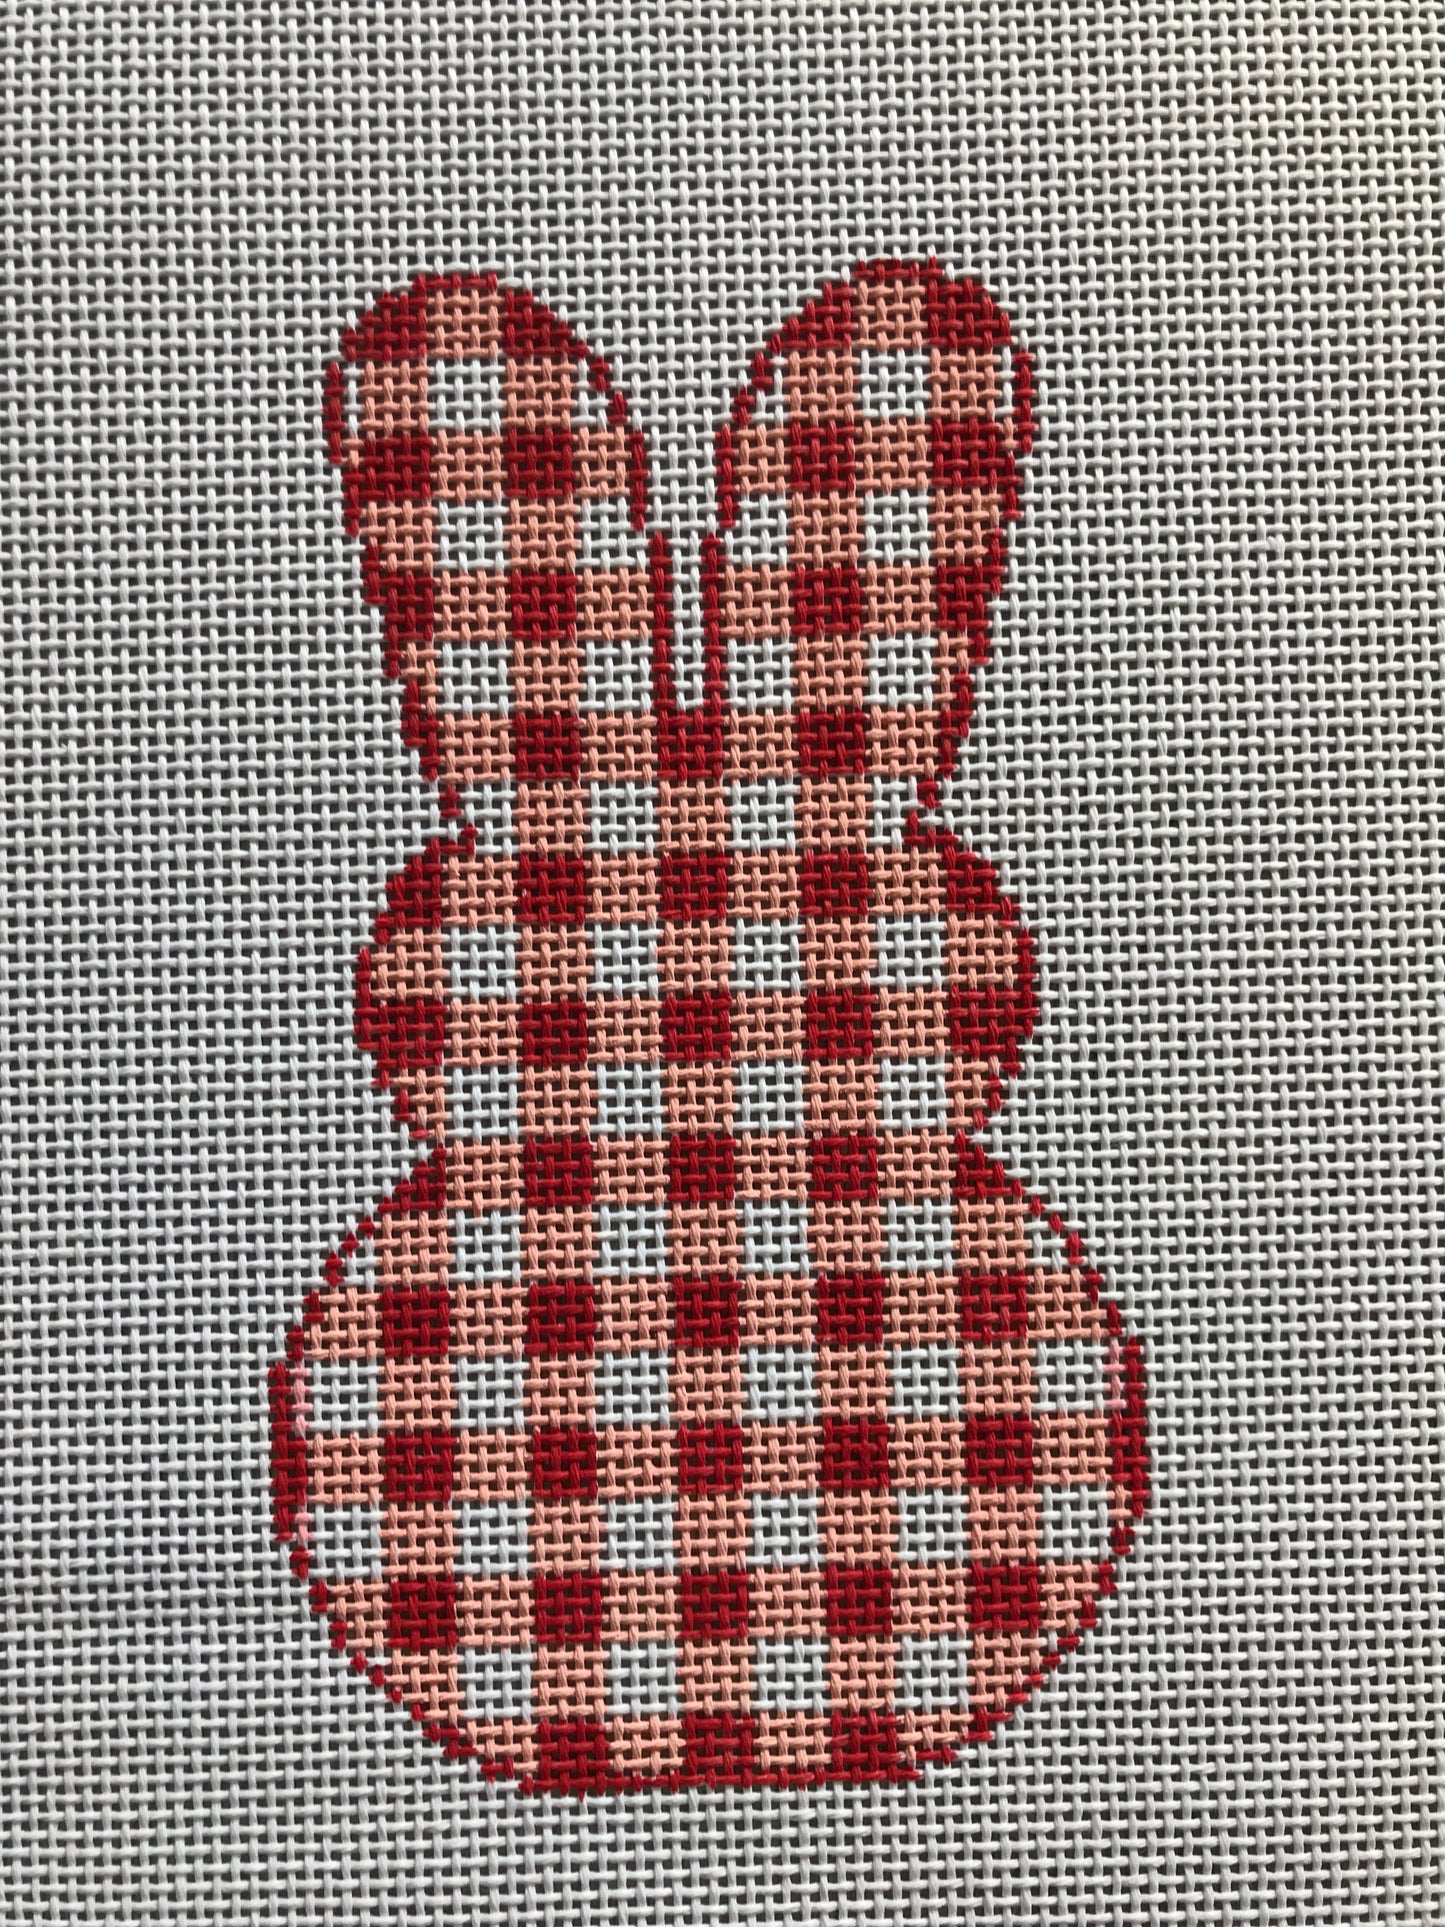 GIngham Bunny Red